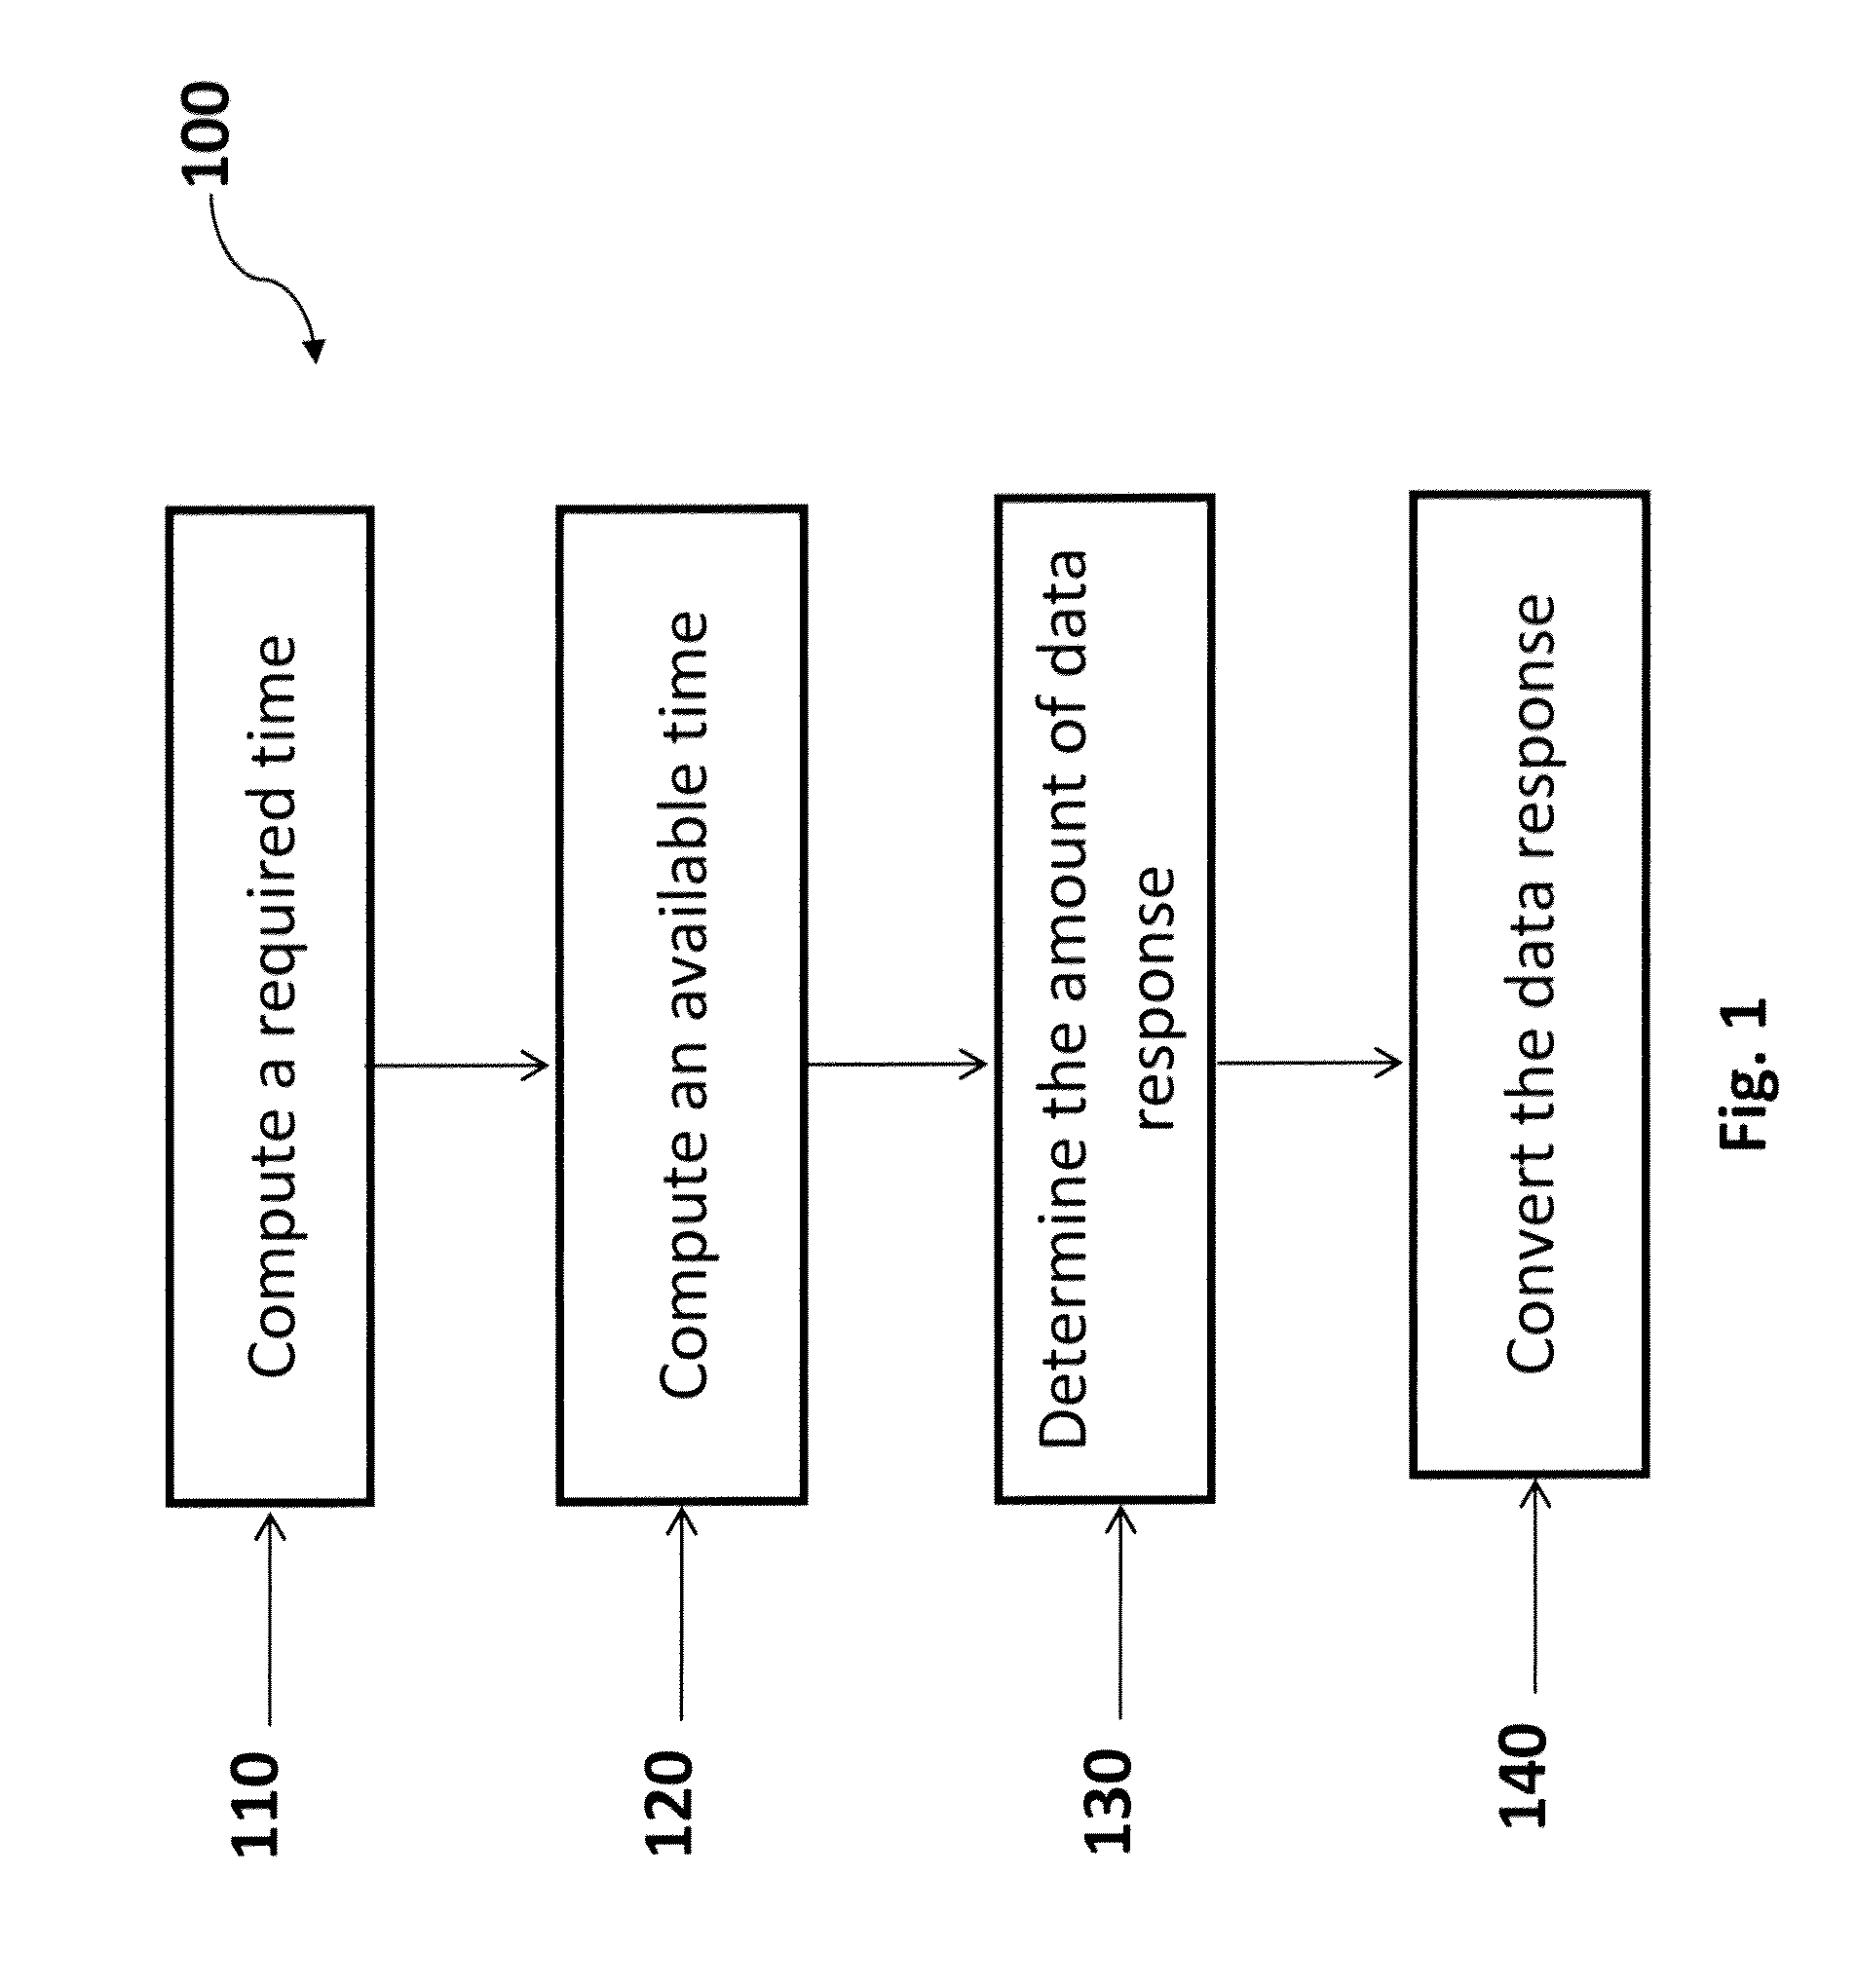 System and method for dynamic modification of web page content to ensure consistent response time